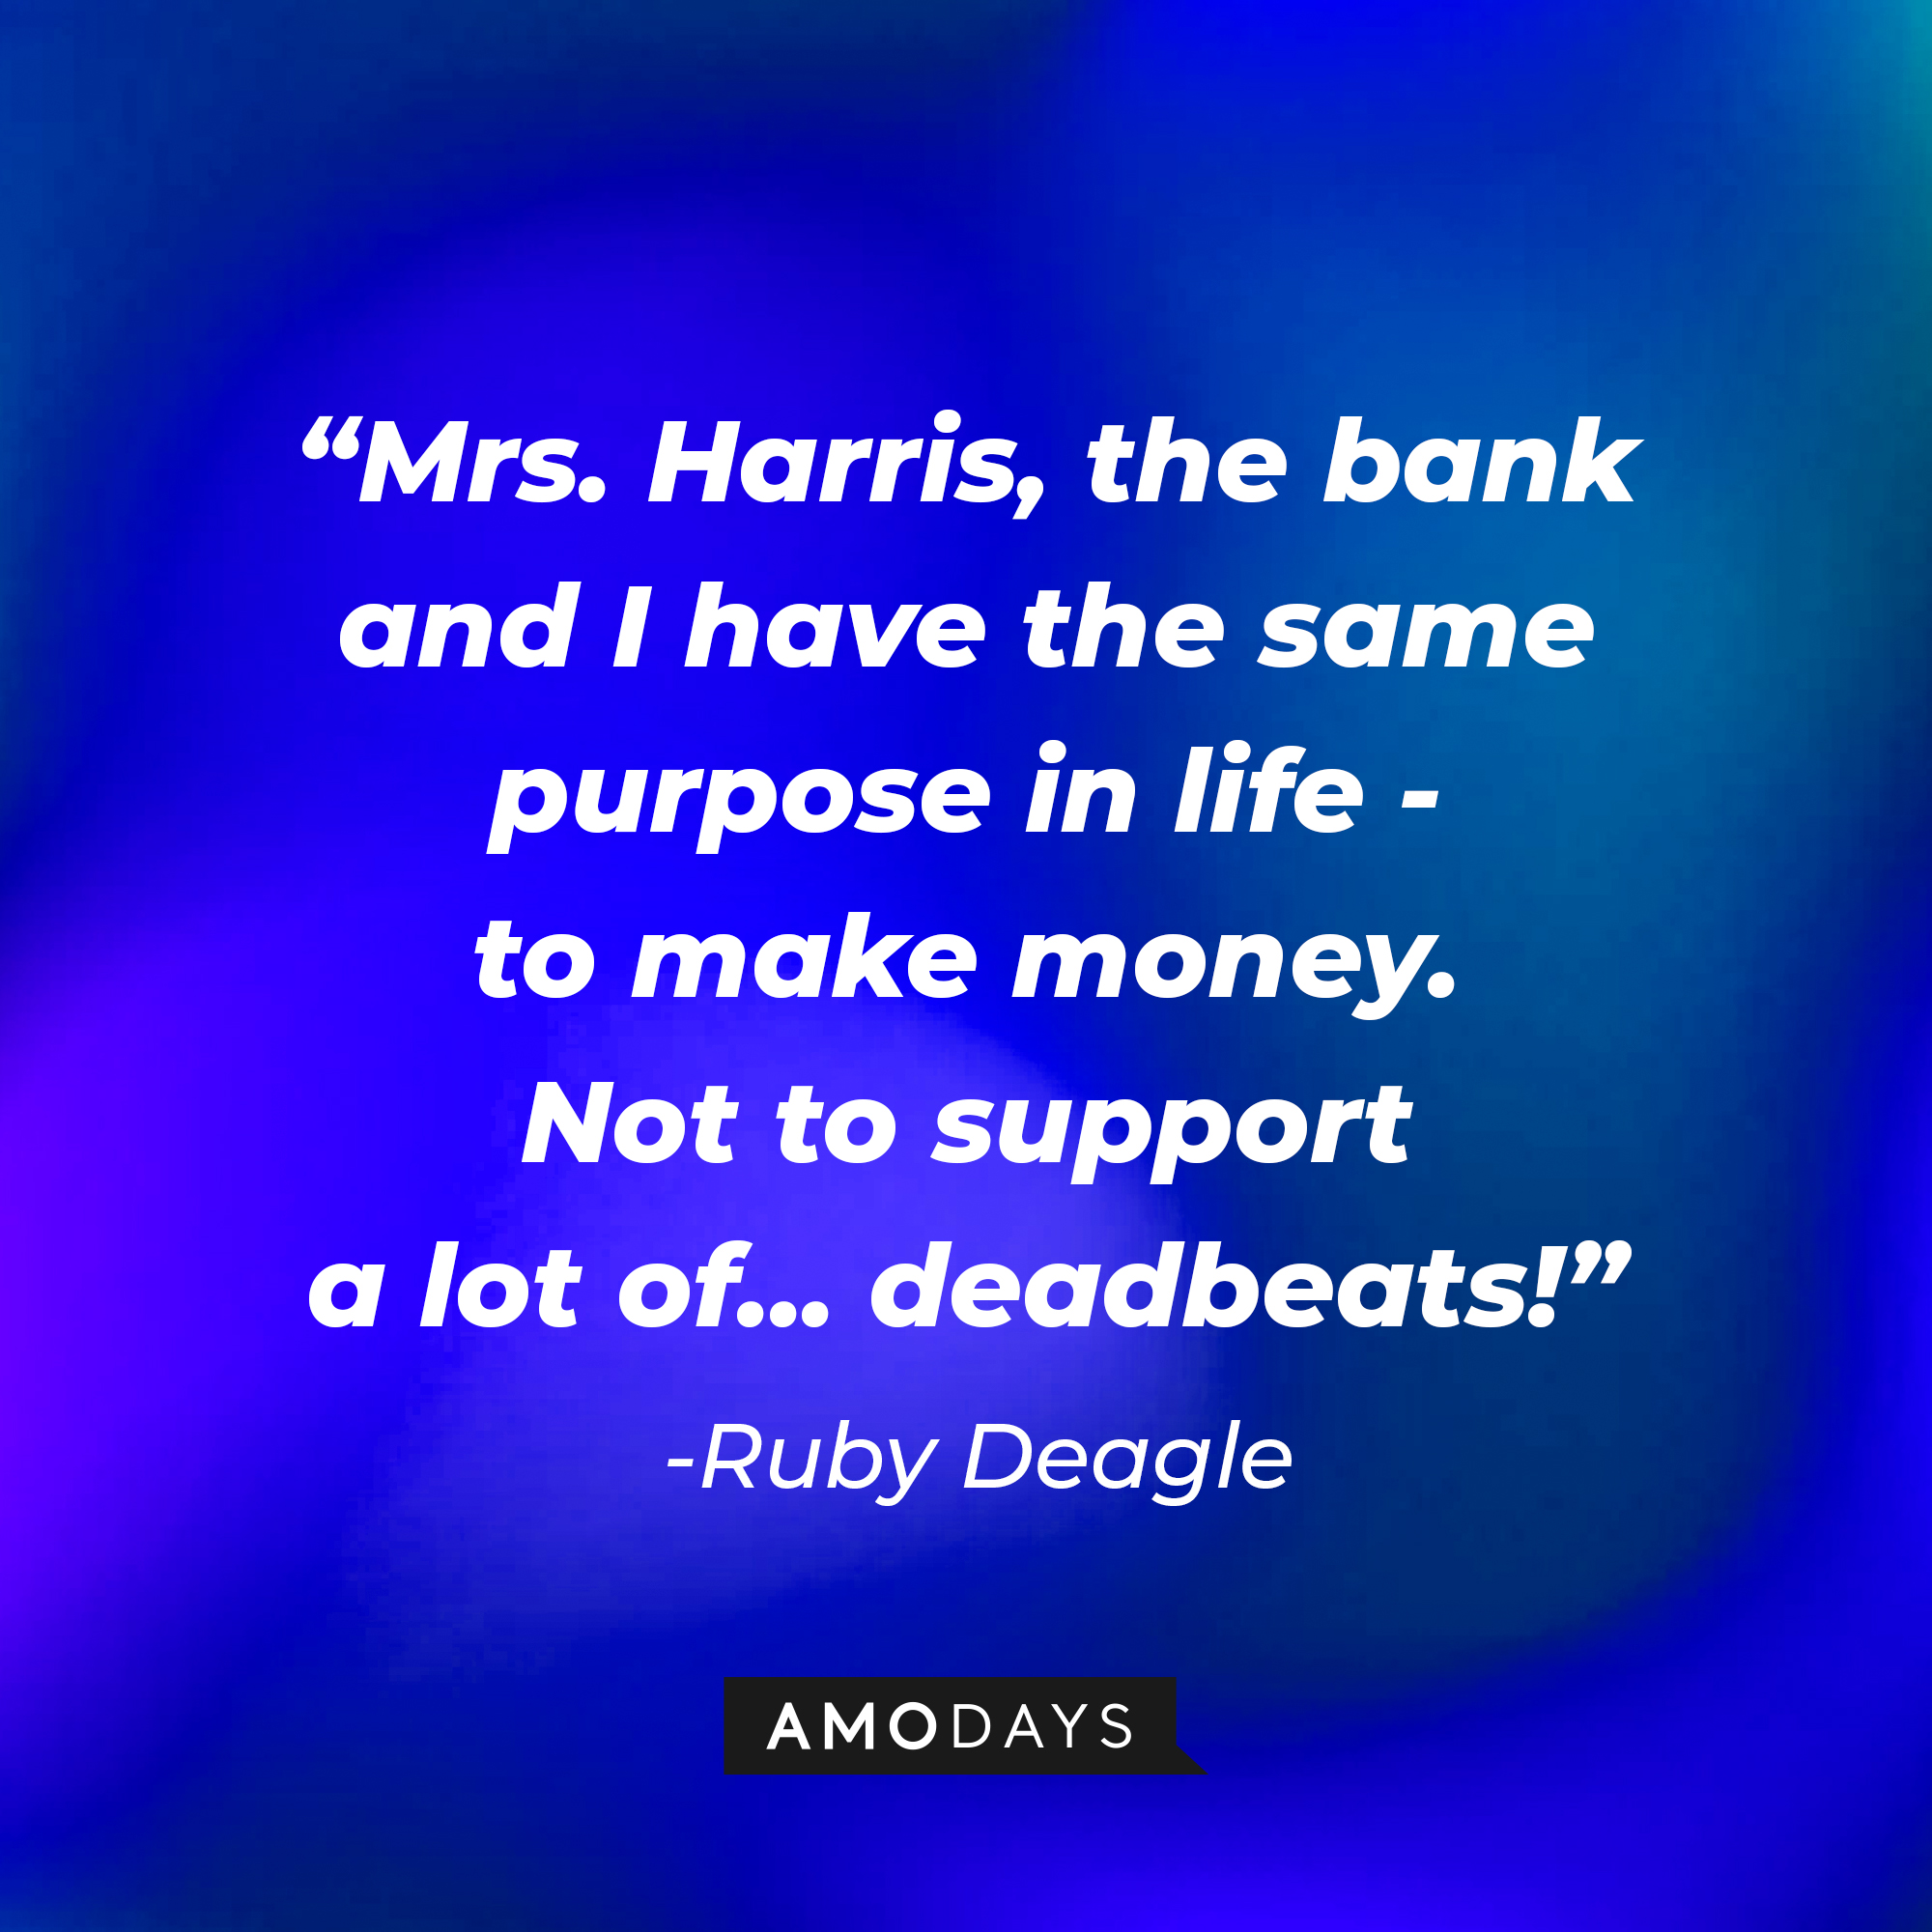 Ruby Deagle's quote: "Mrs. Harris, the bank and I have the same purpose in life - to make money. Not to support a lot of... deadbeats!" | Source: AmoDays